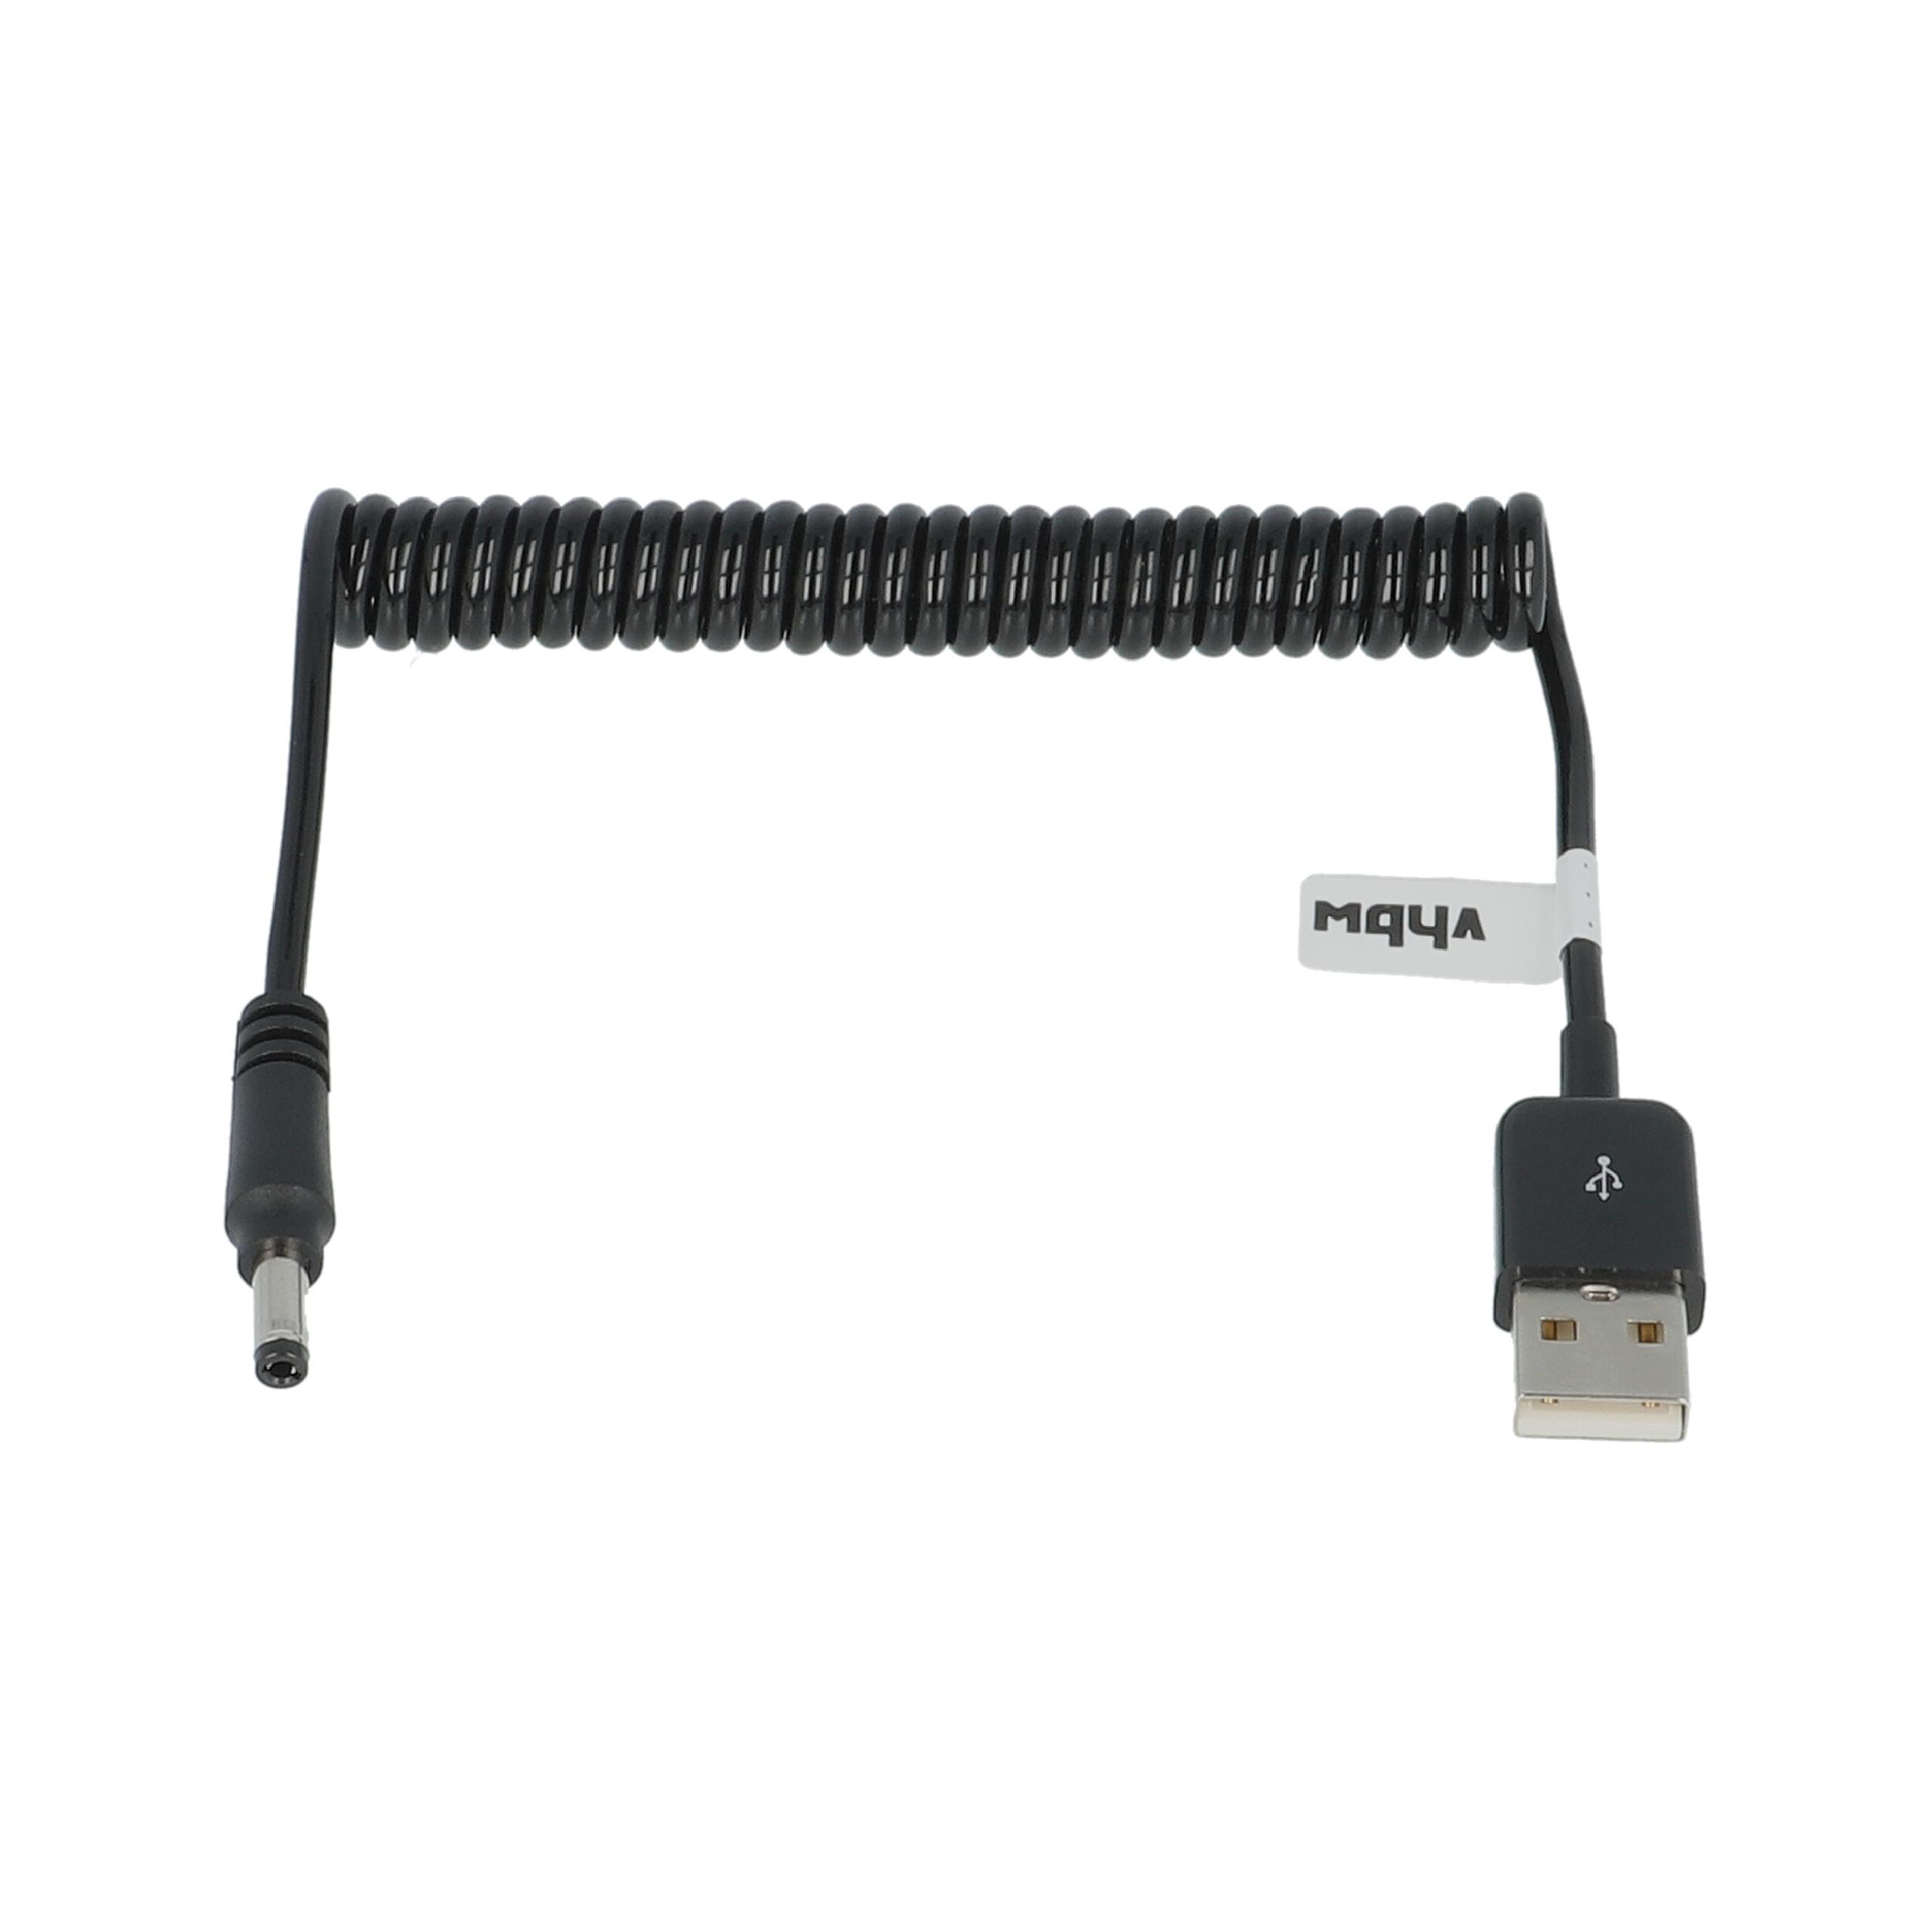 USB Charging Cable replaces Panasonic K2GHYYS00002 for Panasonic Camera, Video Camera, Camcorder - 1 m